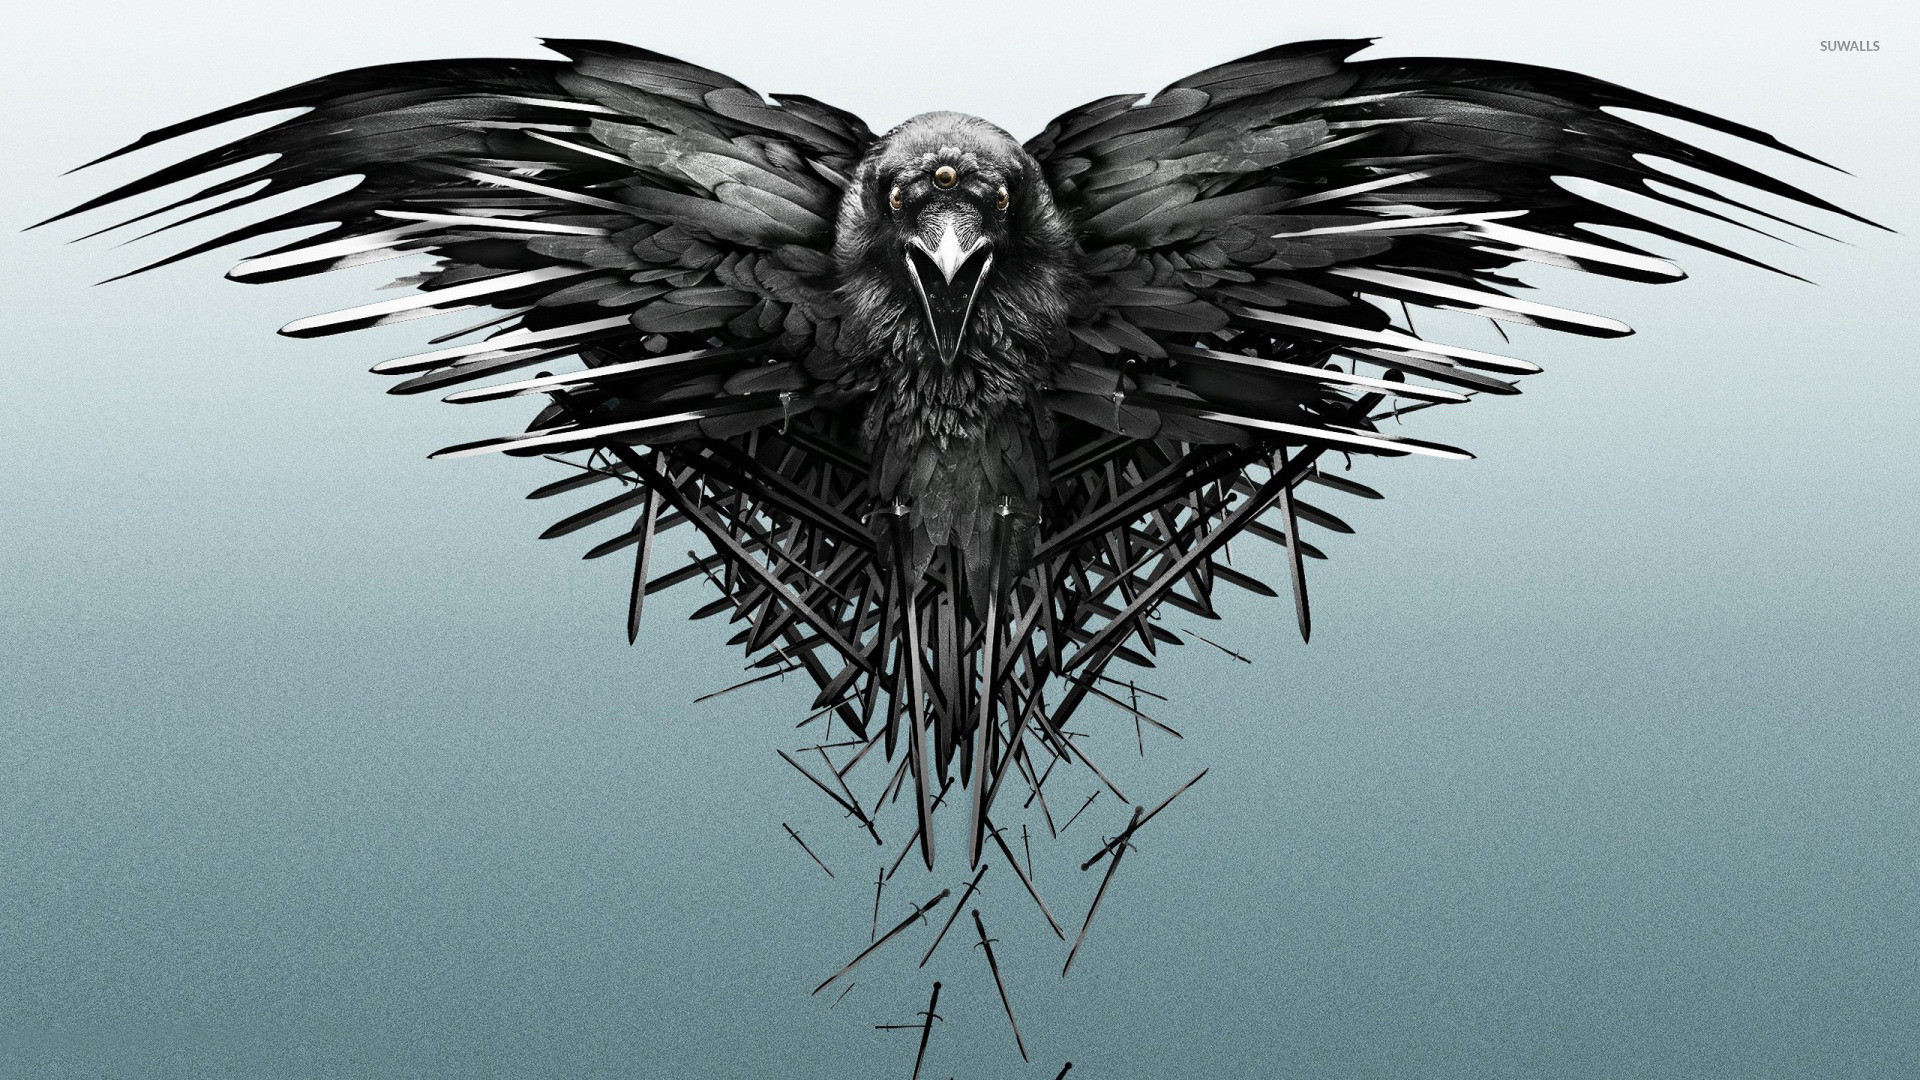 1920x1080 The three-eyed raven - Game of Thrones wallpaper